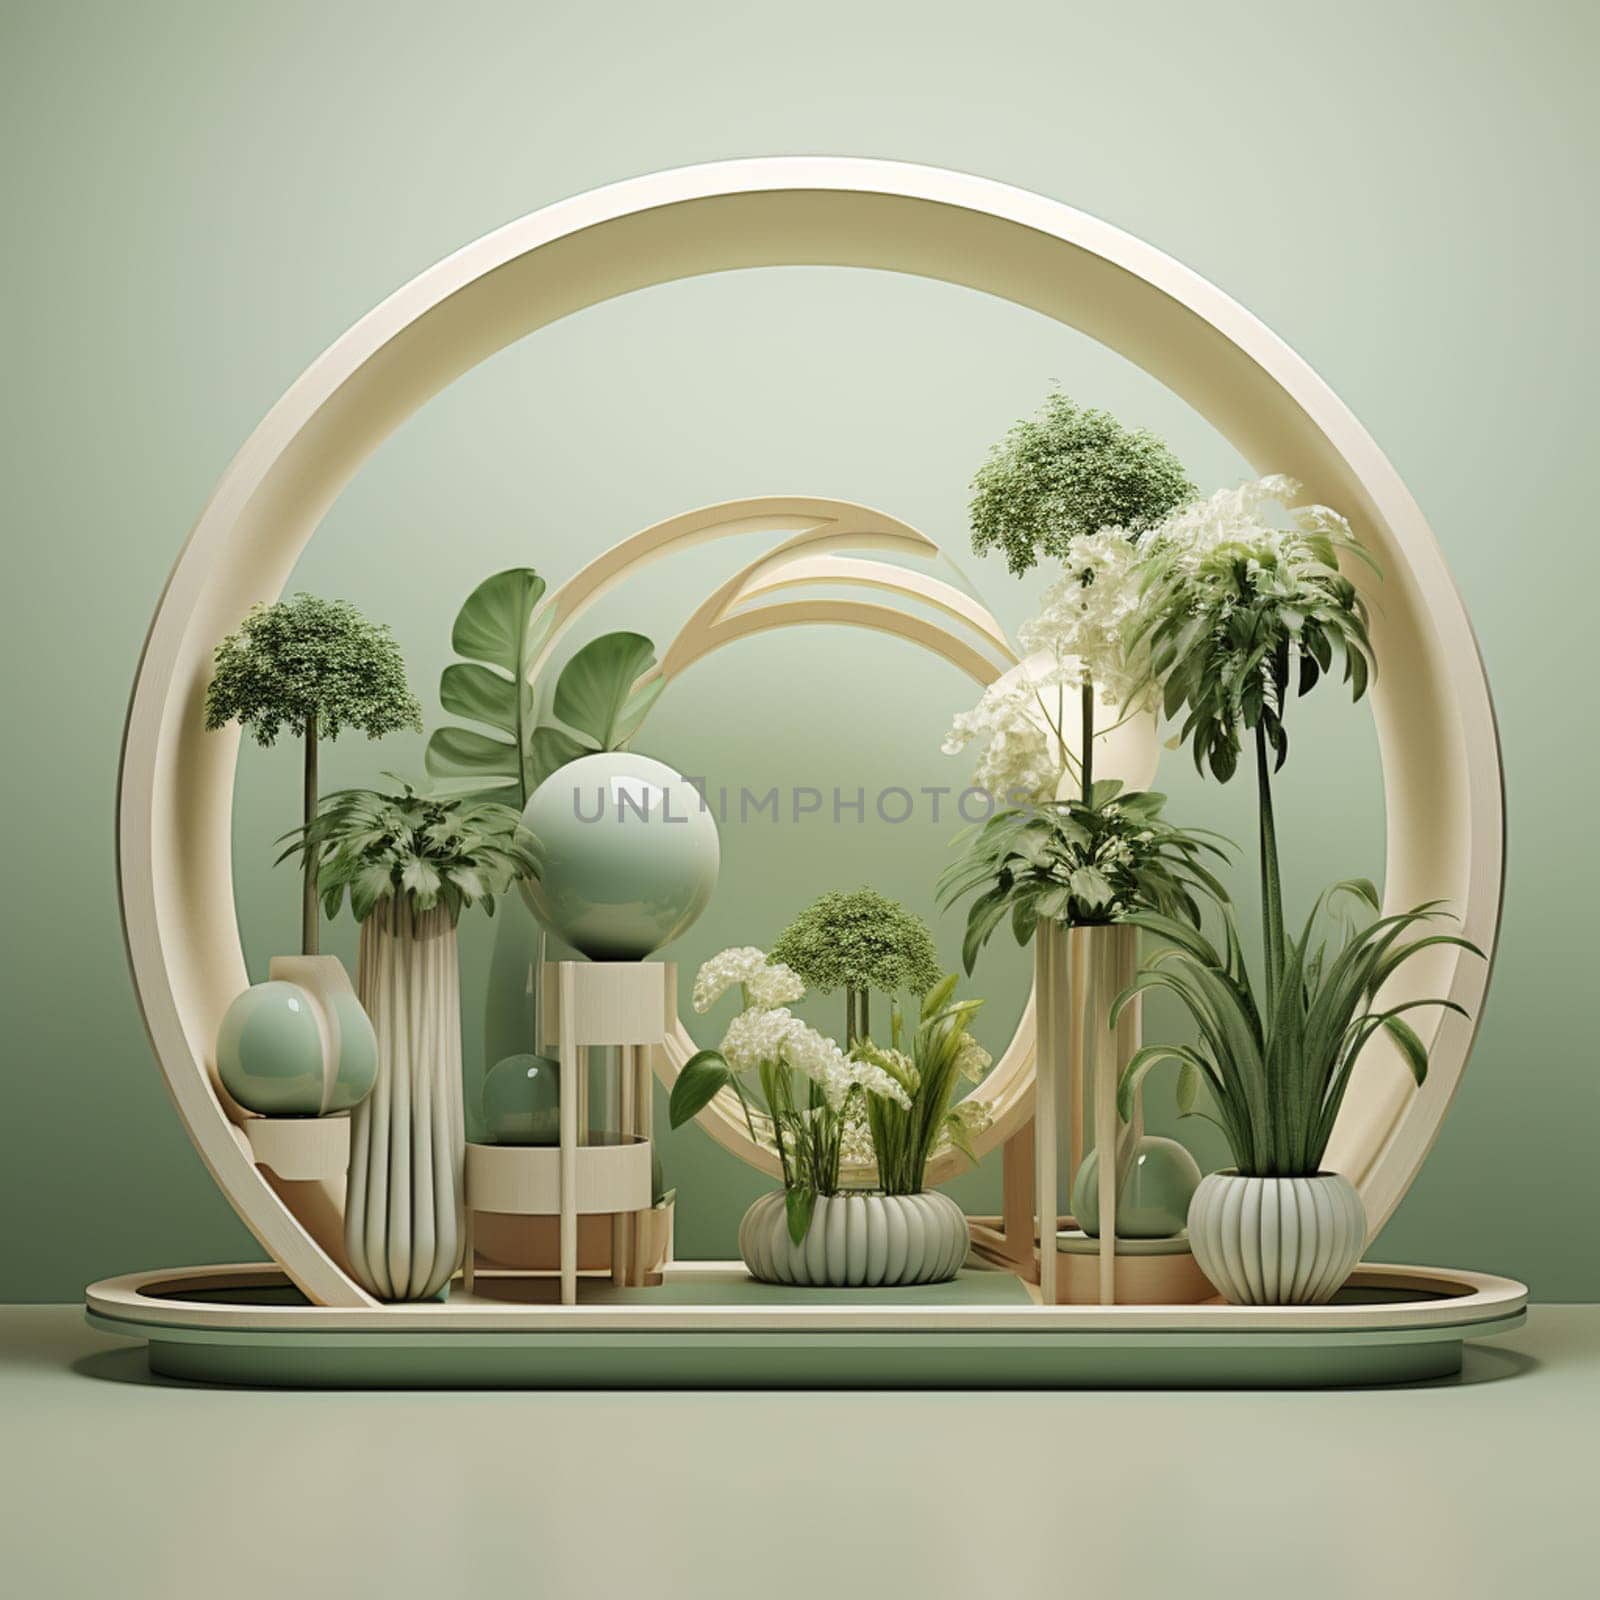 3d background with a pedestal. Round frame made of gold with flowers. Minimalistic realistic image of an empty podium for displaying cosmetic products. 3D illustration. High quality photo